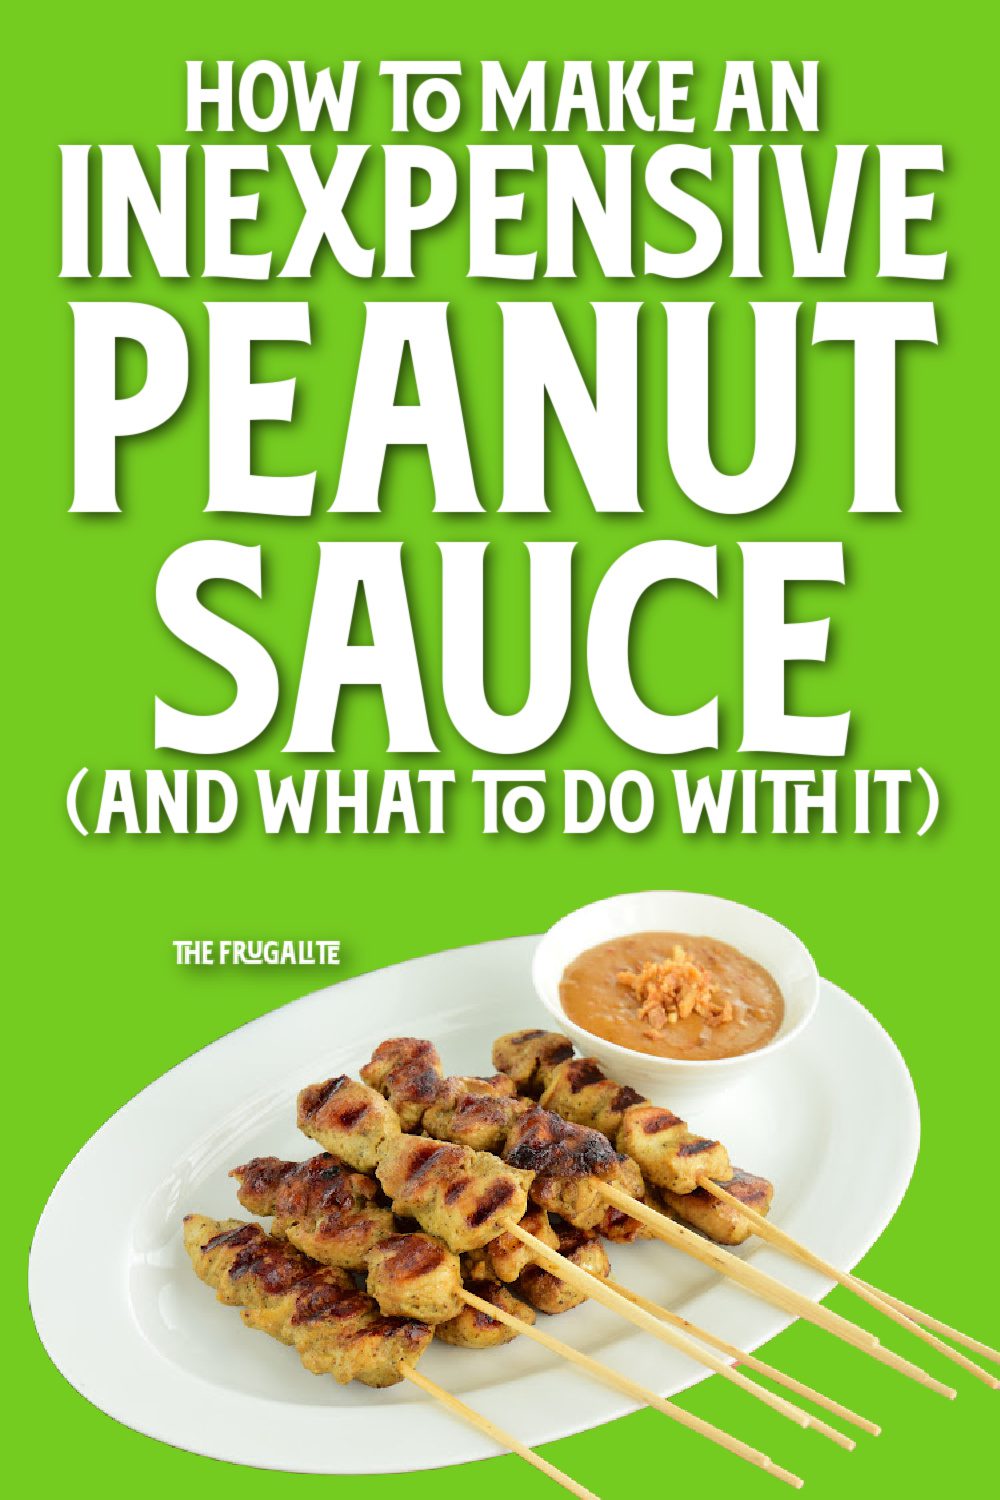 How to Make an Inexpensive Peanut Sauce (and What to Do with It)